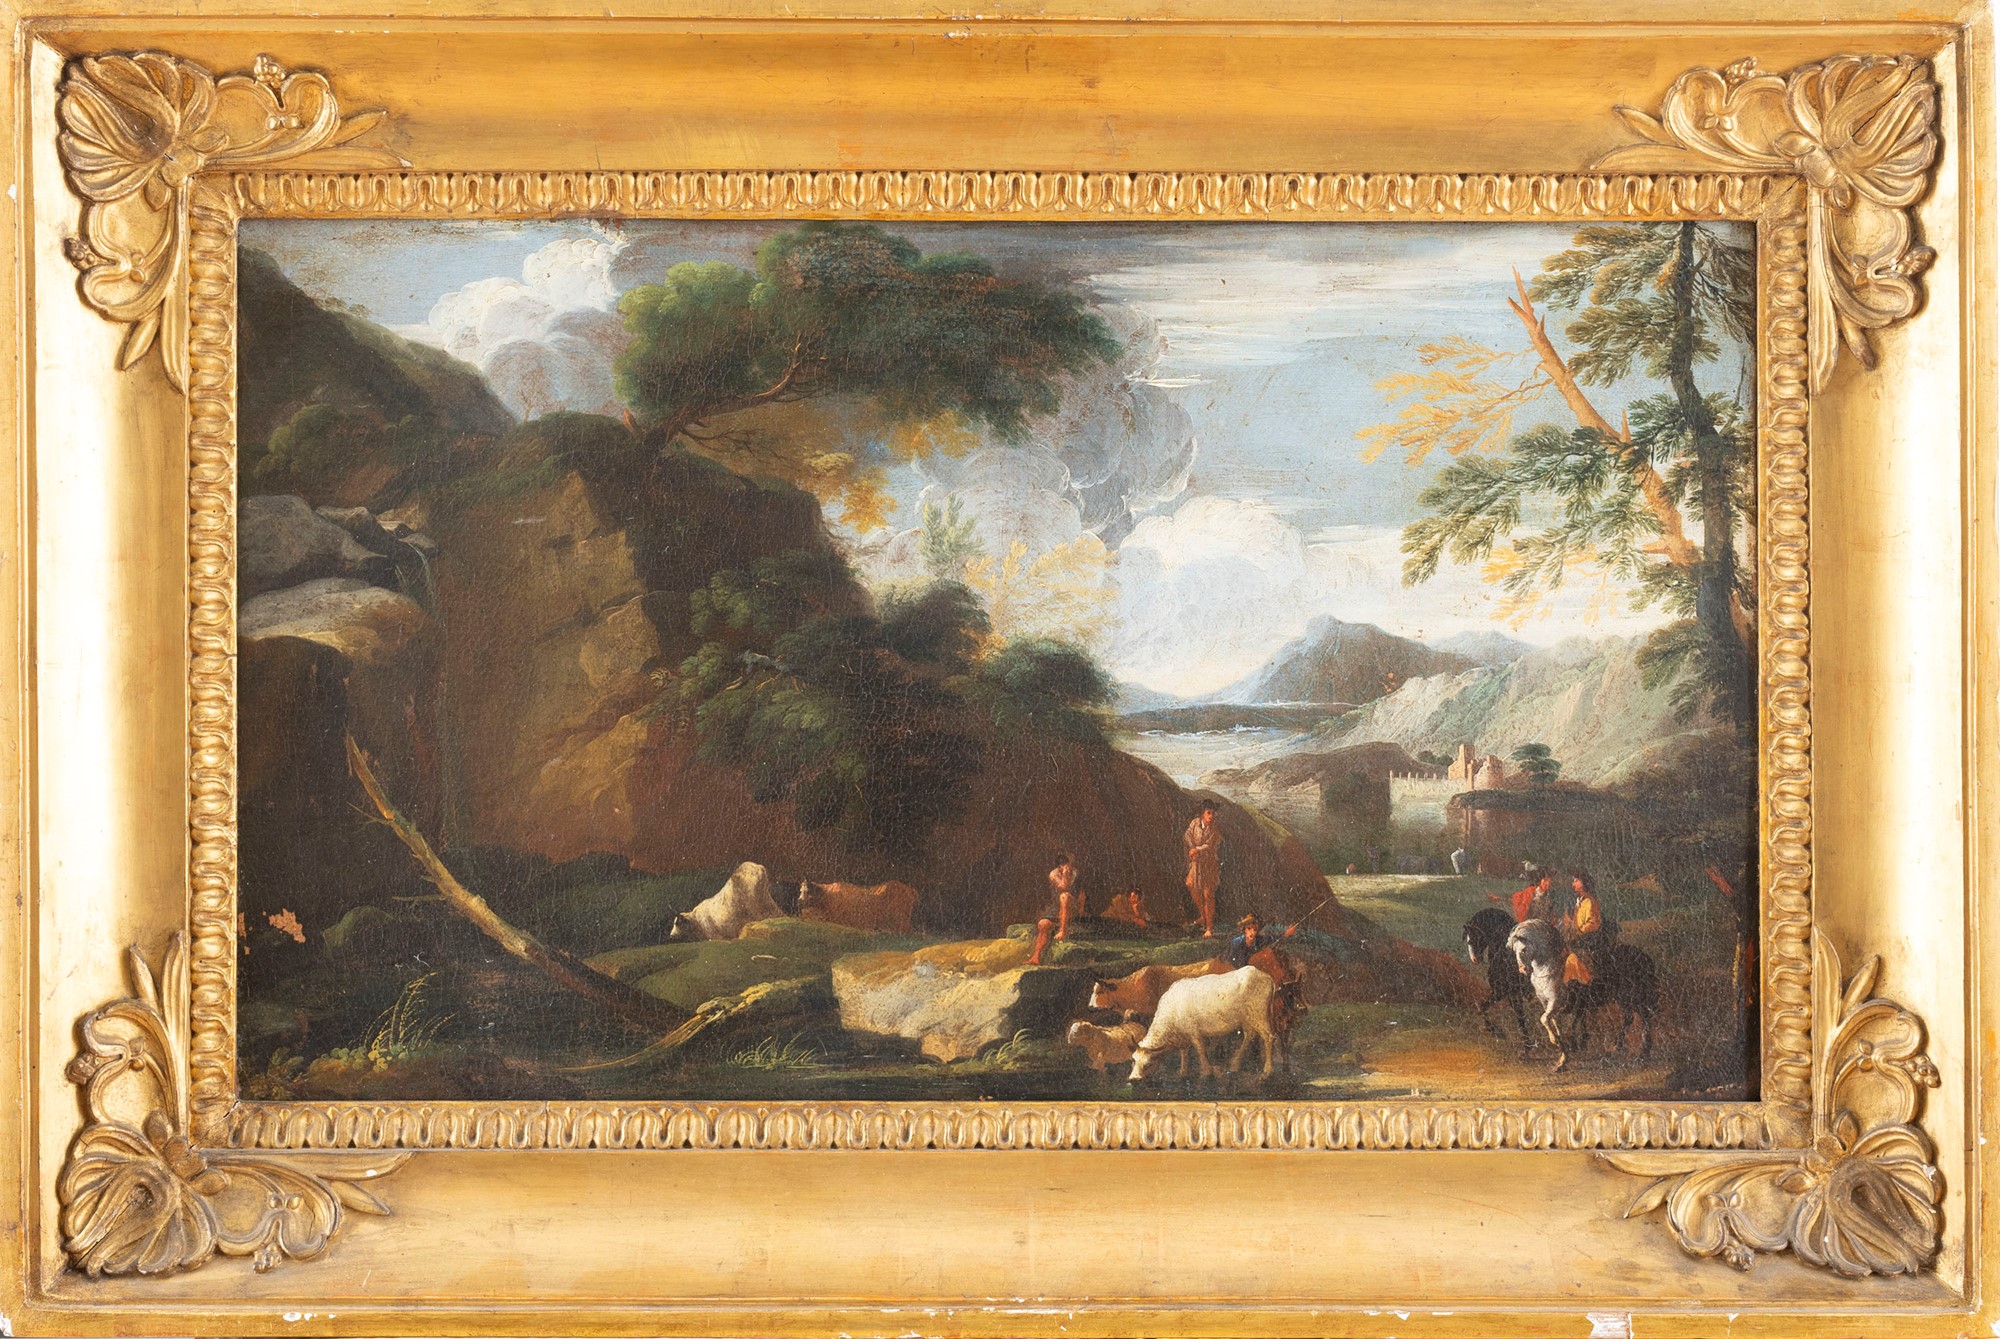 Neapolitan school, XVII century - Two river landscapes with rocky mountains - Image 3 of 7